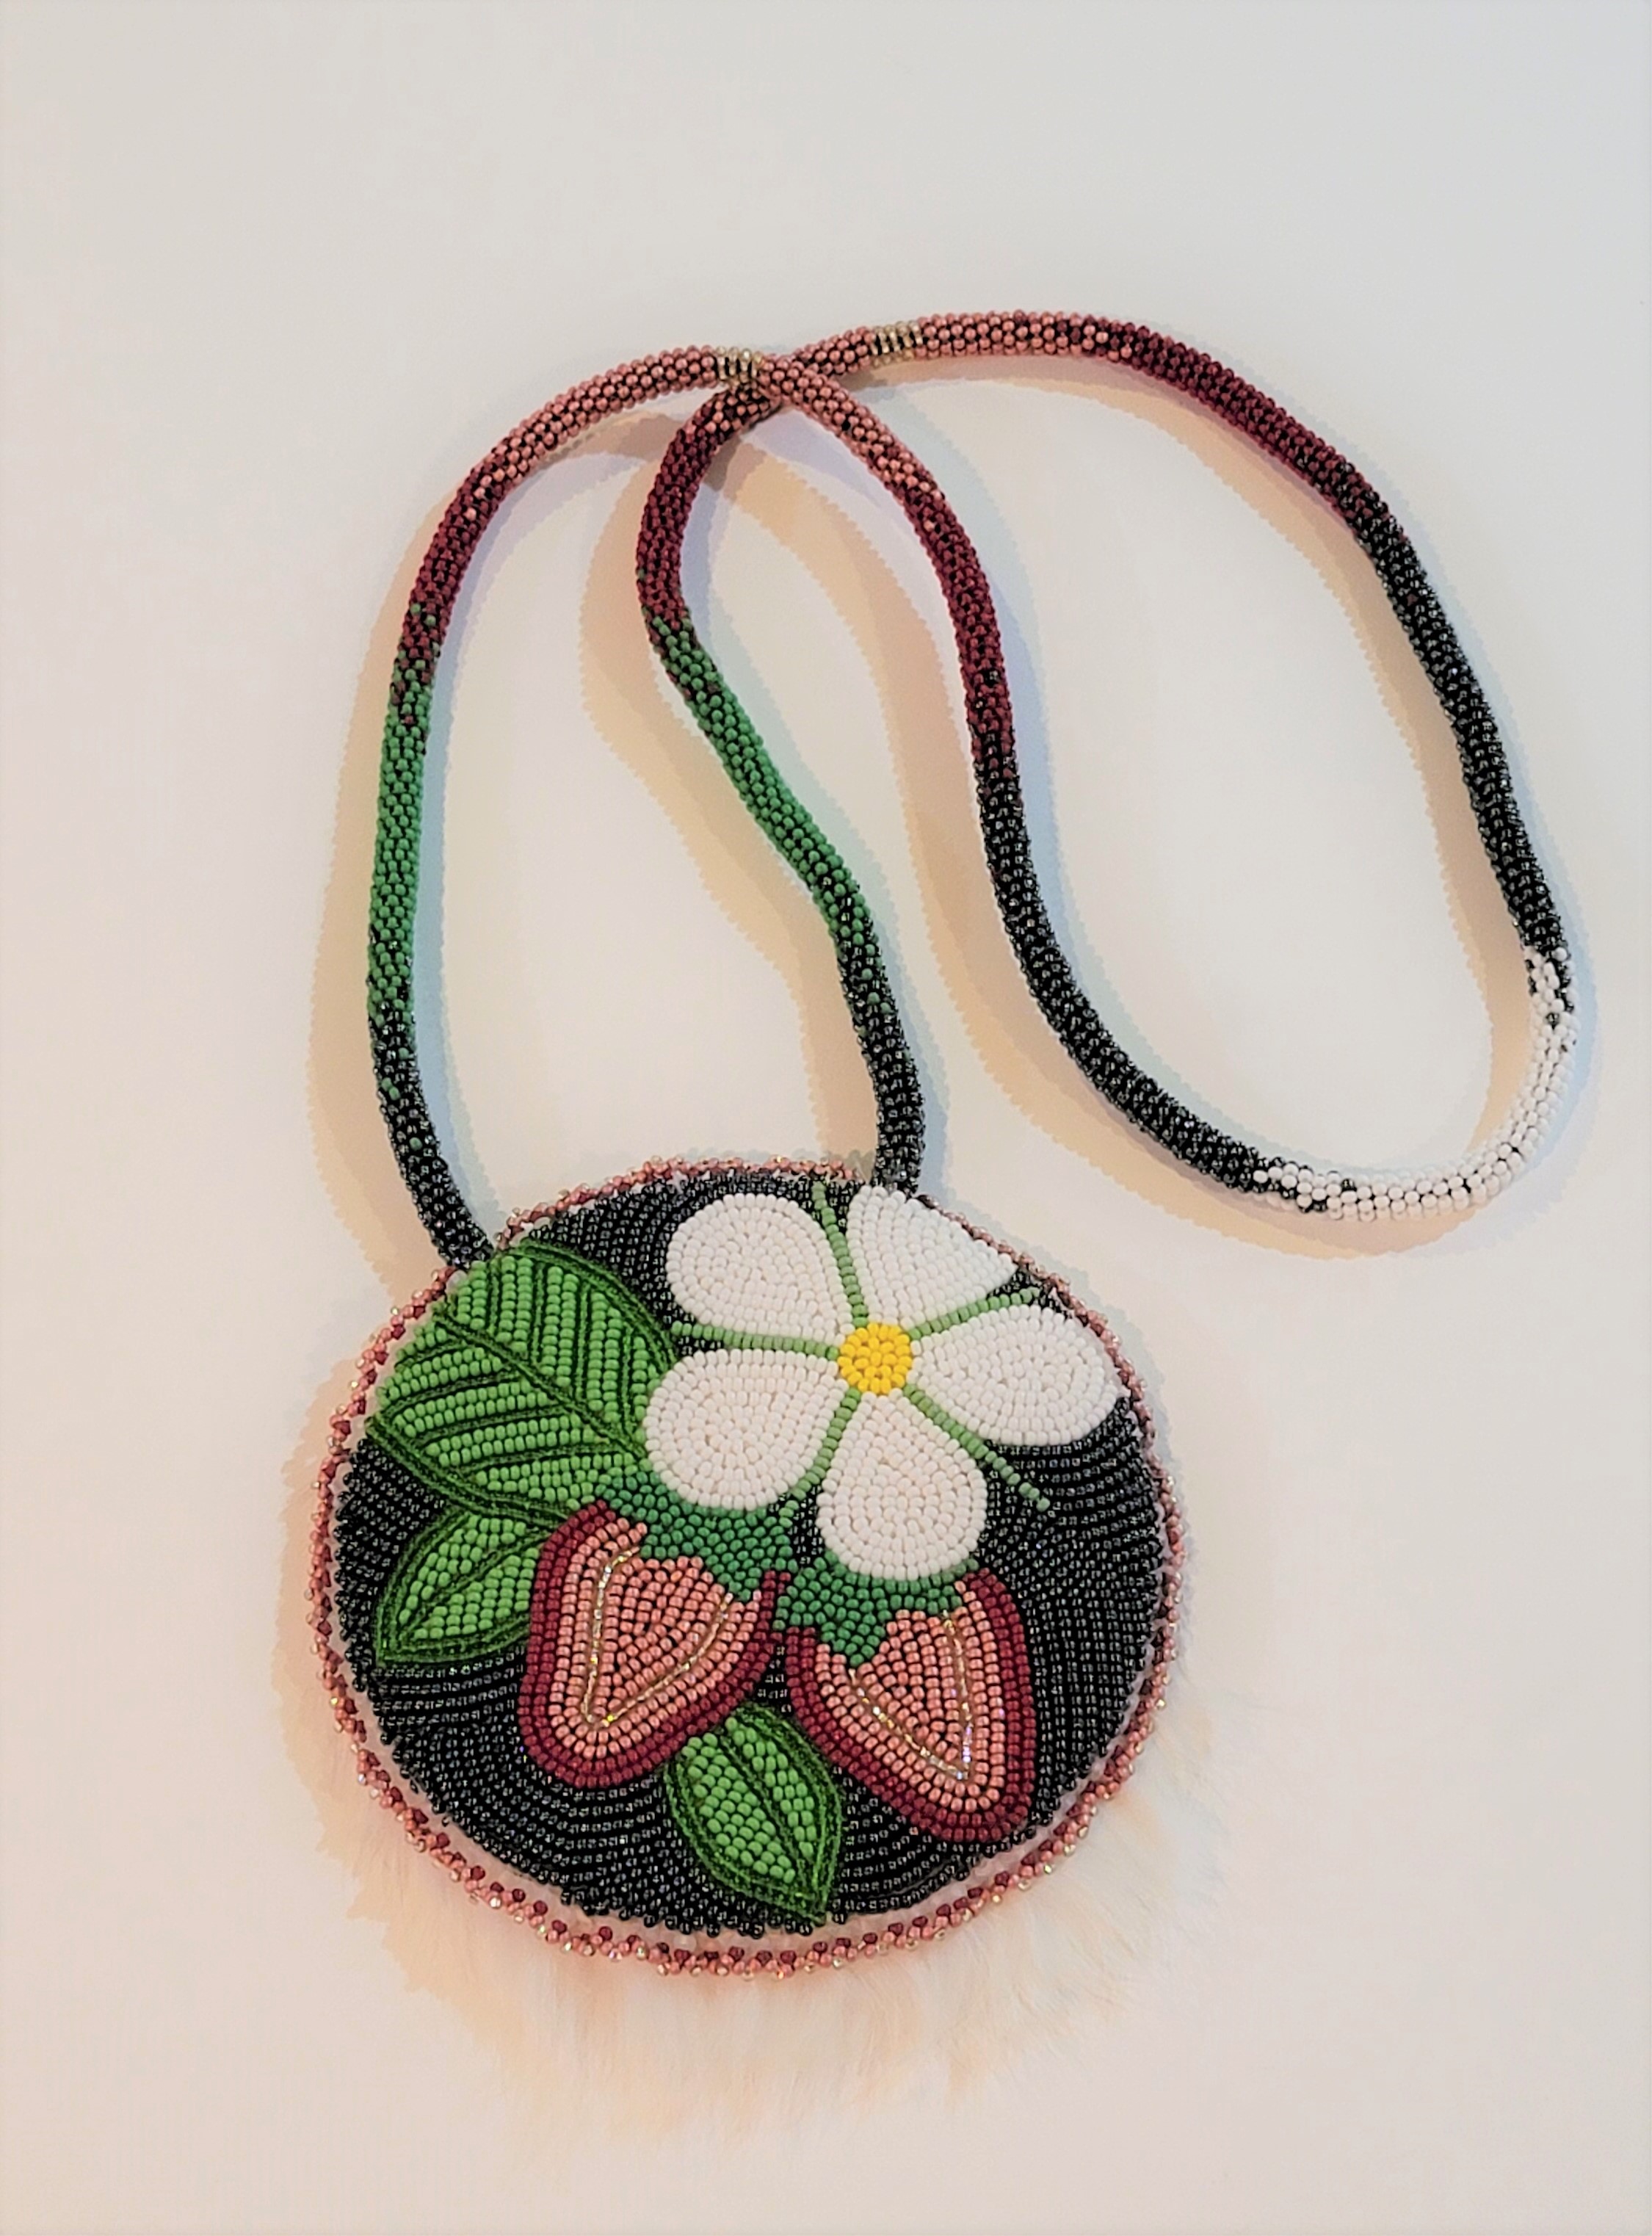 A beaded medallion with straberries and a flower on it